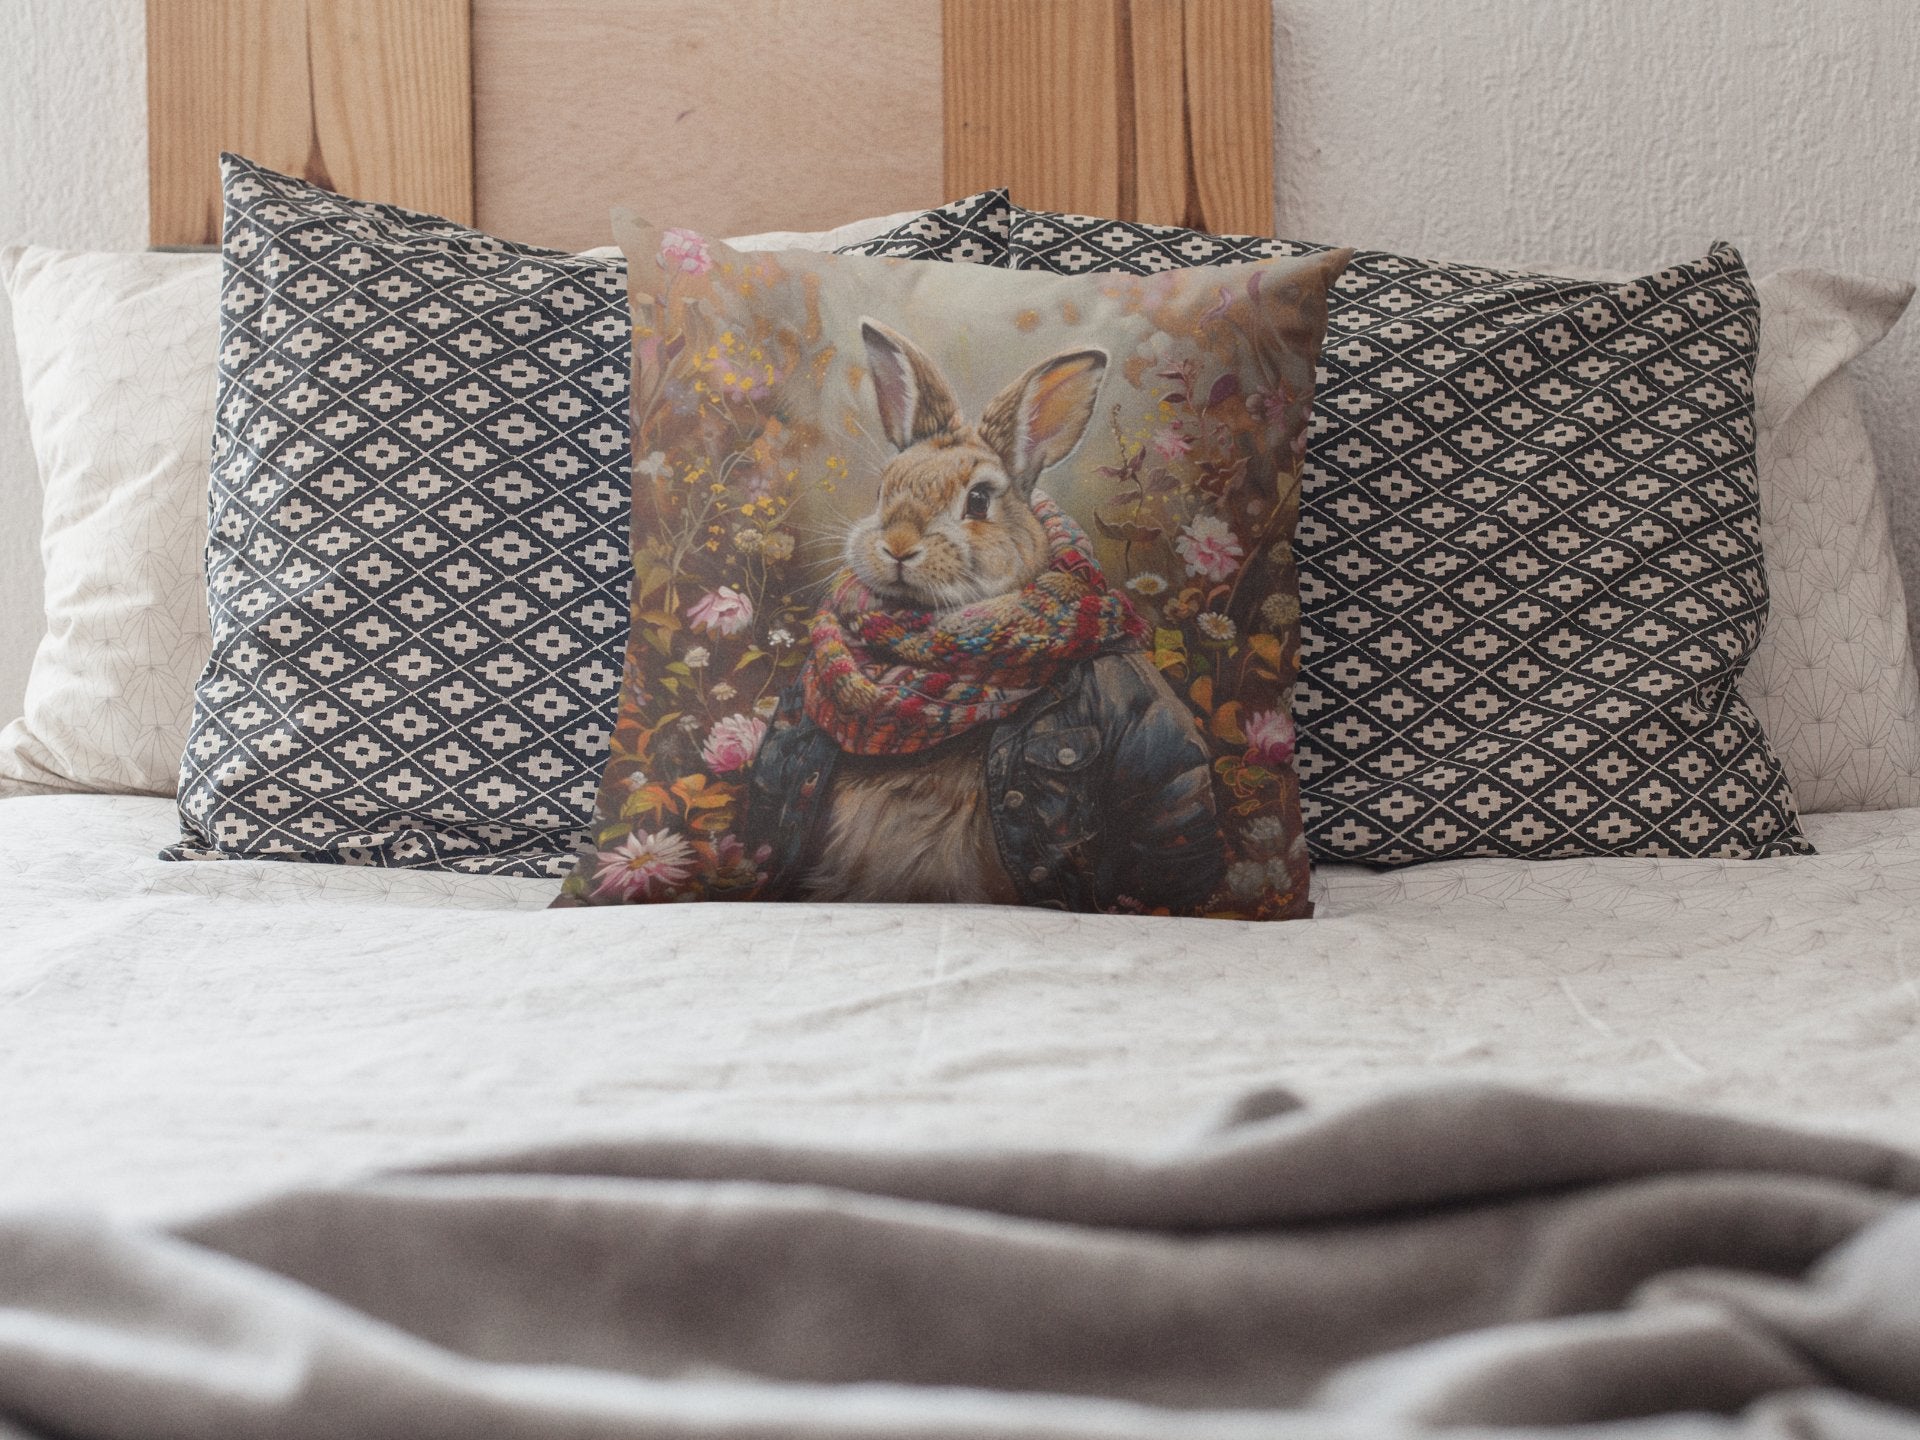 Cute Storybook Rabbit with Jacket & Scarf in Wildflowers Pillows - Whimsical - FlooredByArt